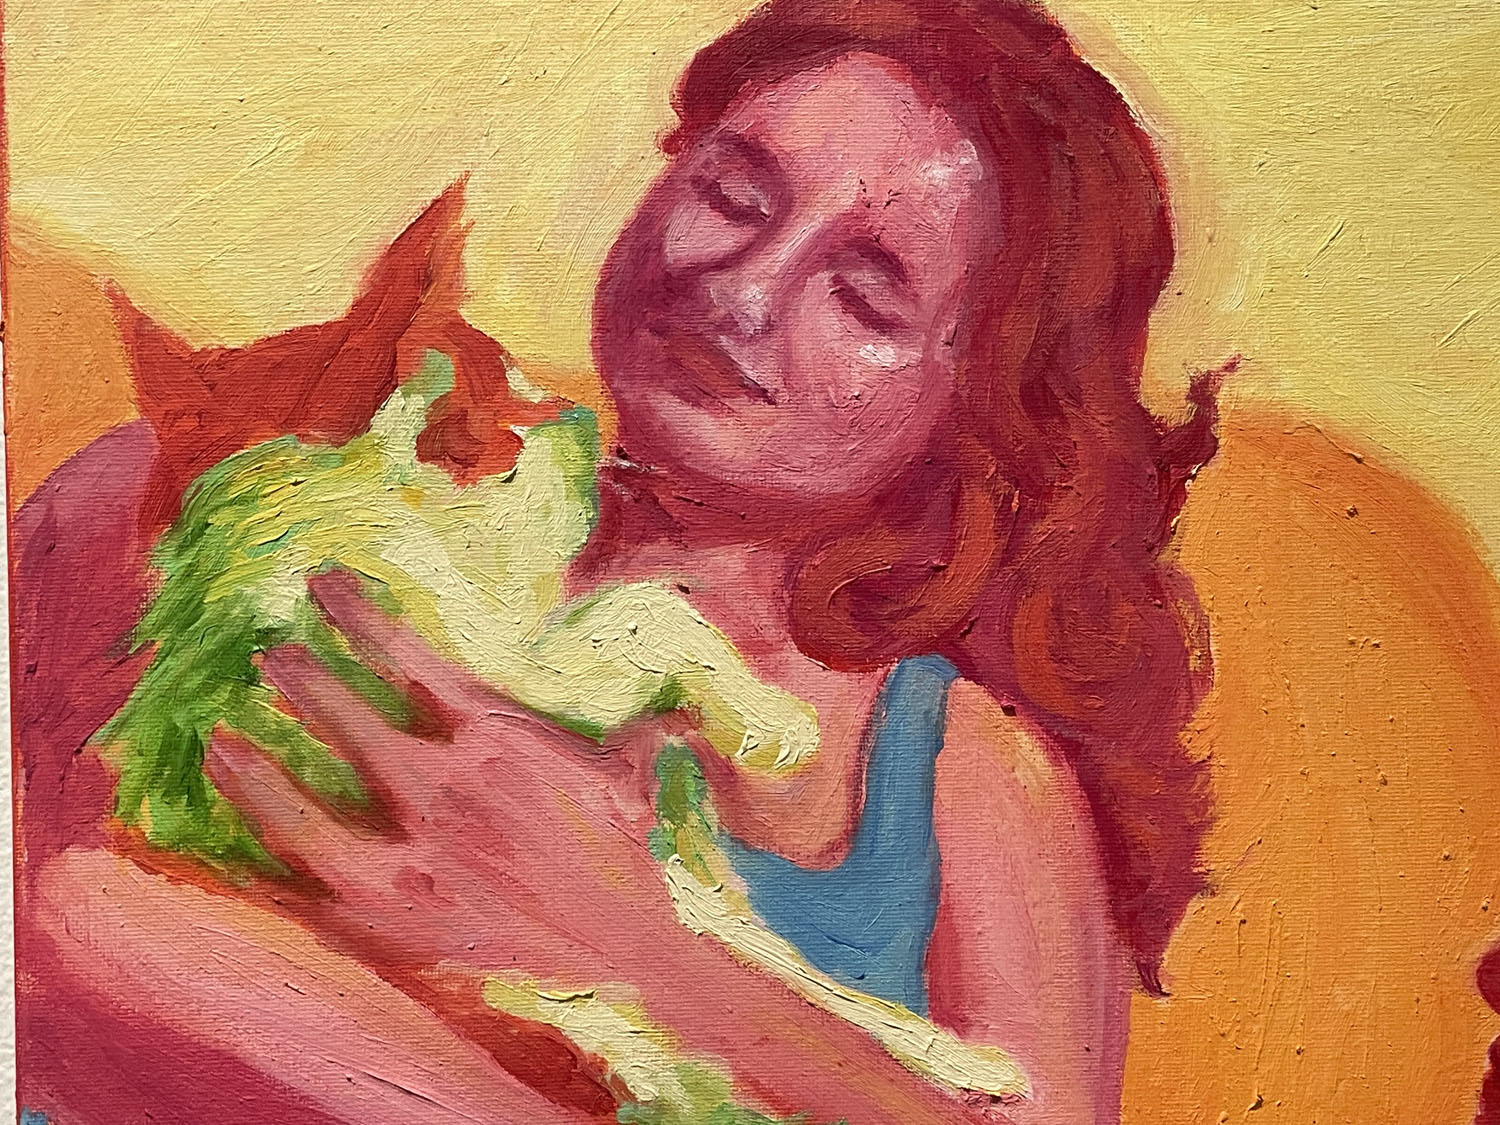 painting of a person holding a cat